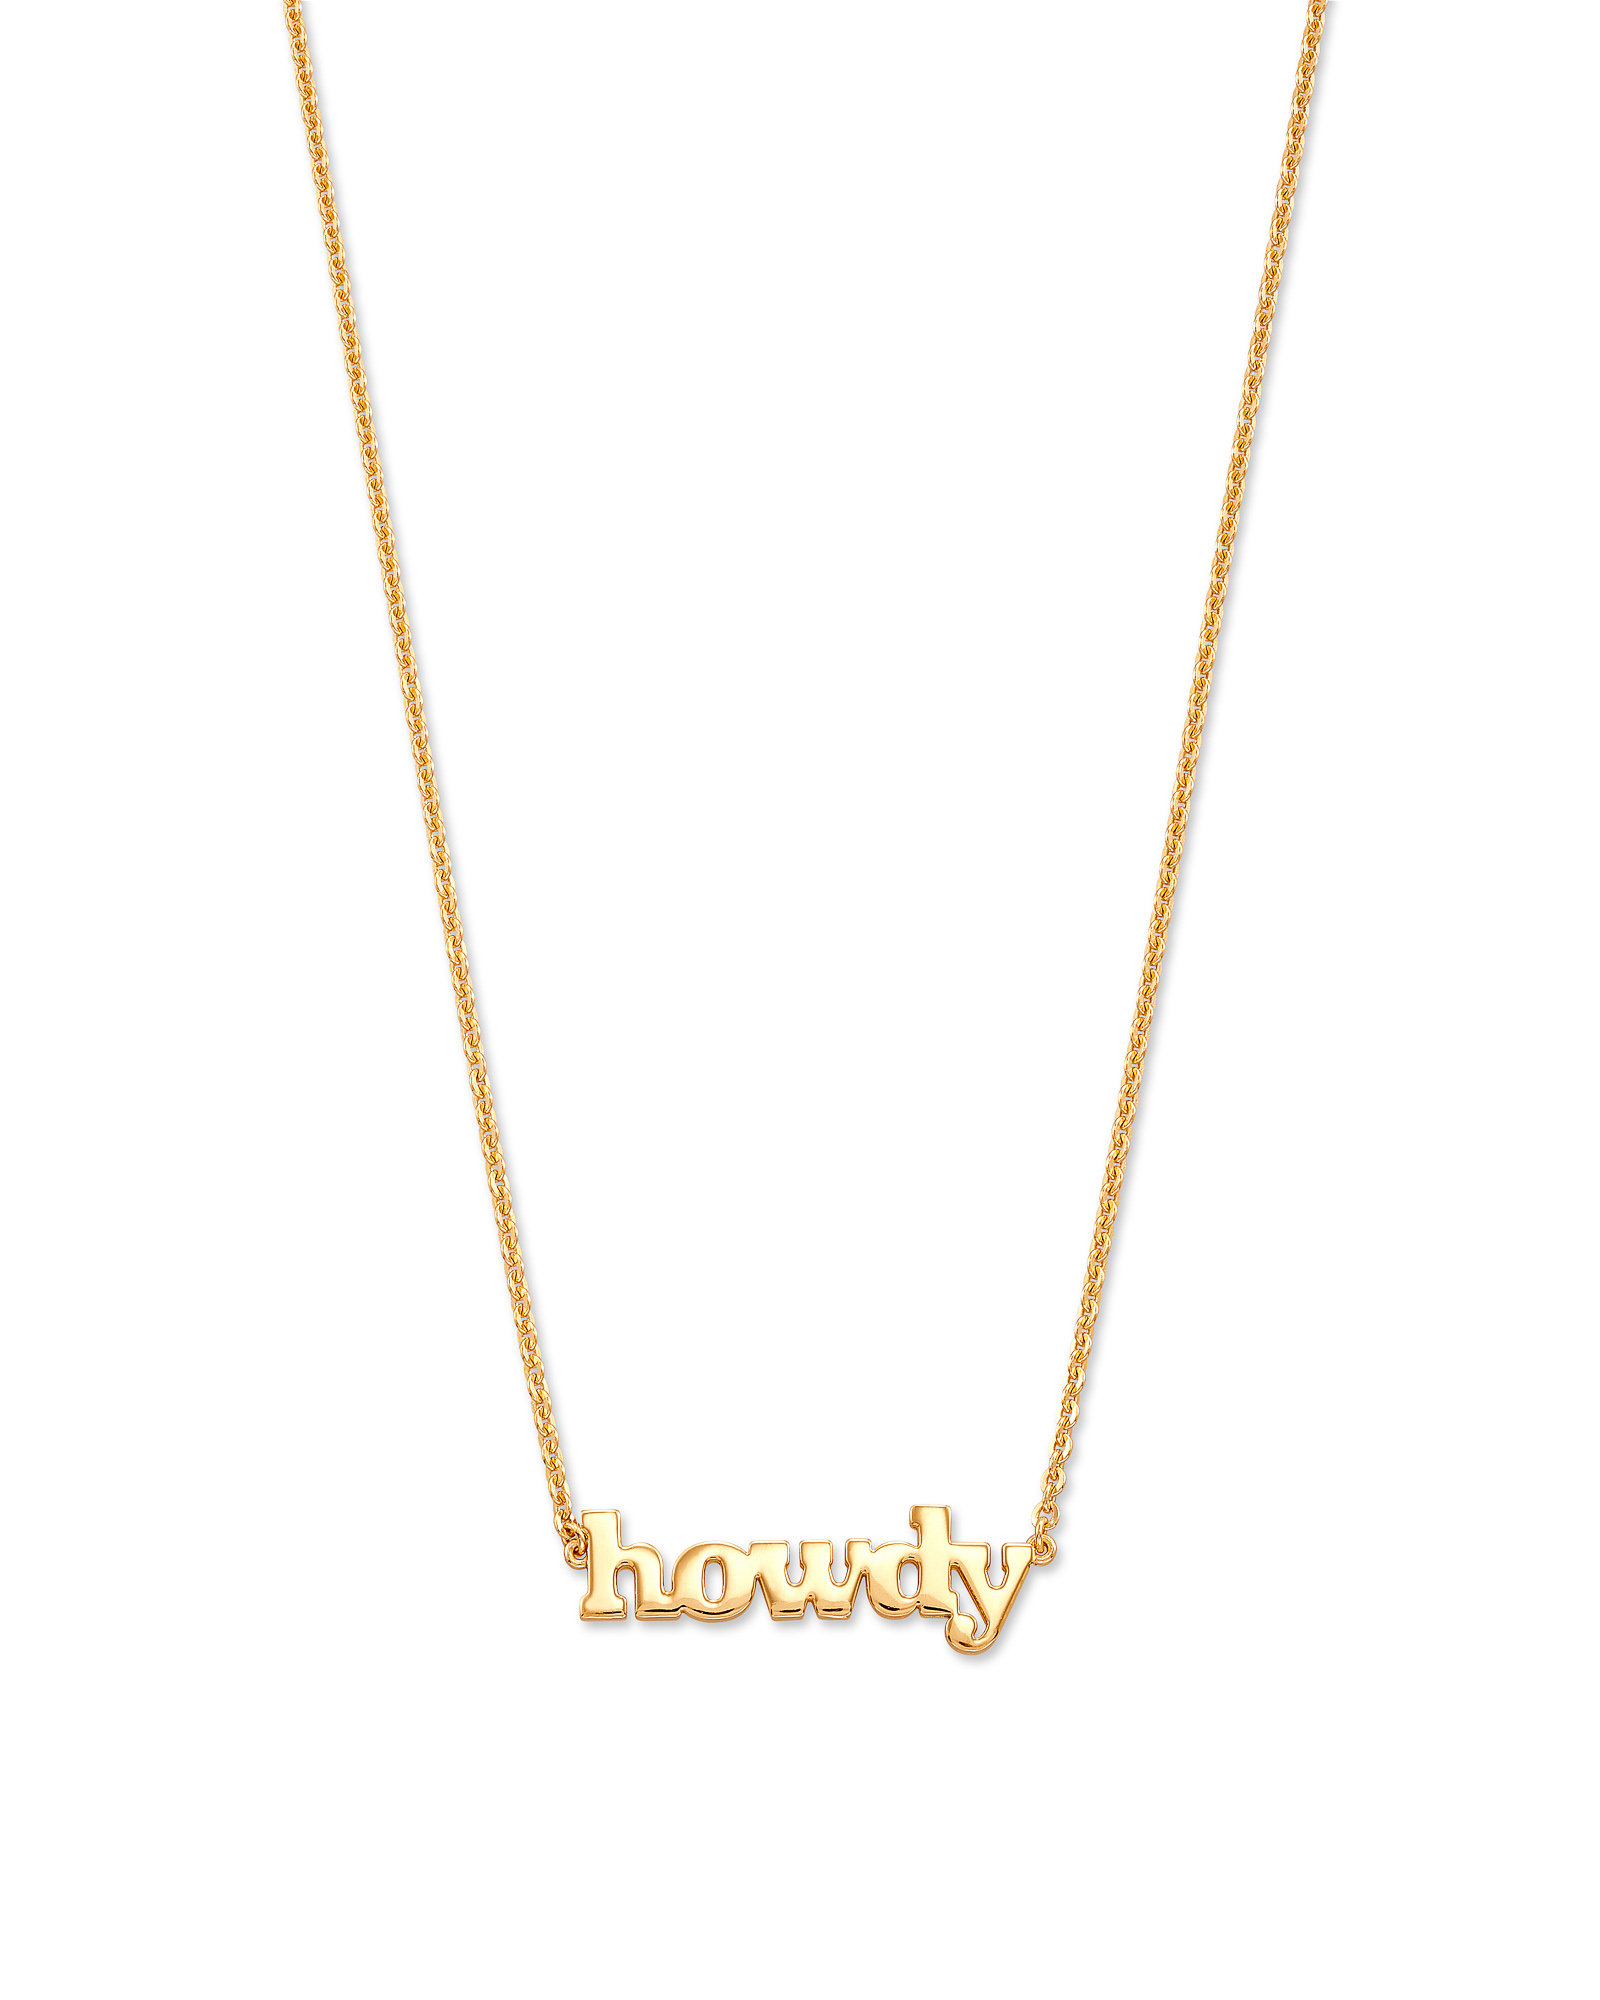 Kendra Scott Cailin Gold Pendant Necklace in Golden Yellow Crystal –  Specialty Design Company